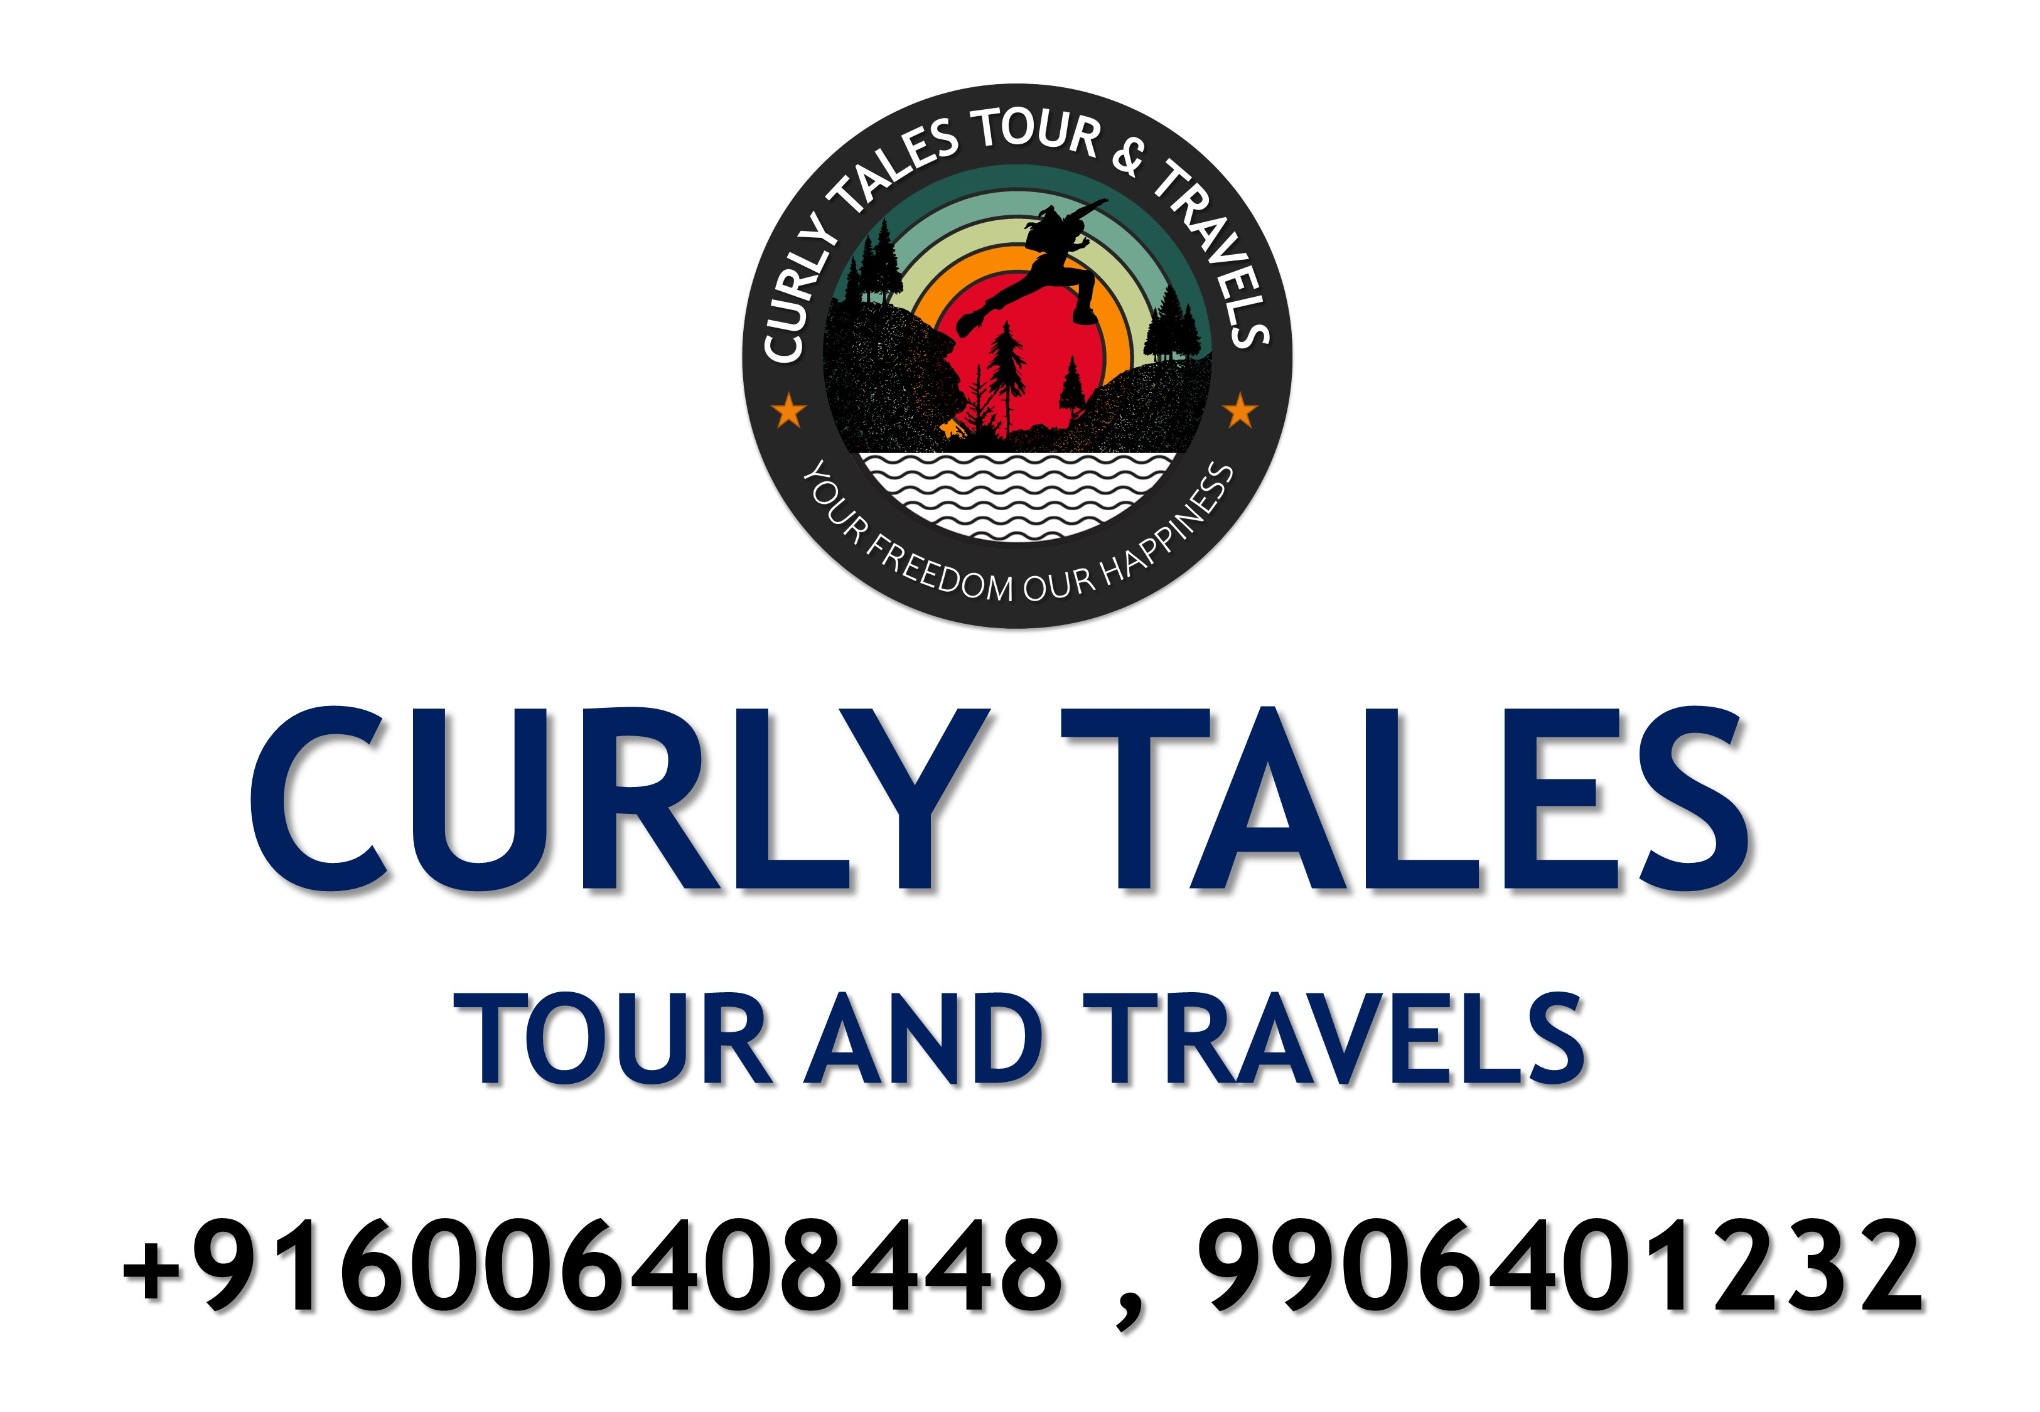 Cruise Tours, Embassy Services, Flight Tickets, Honeymoon Packages, International Tour; Exp: More than 10 year